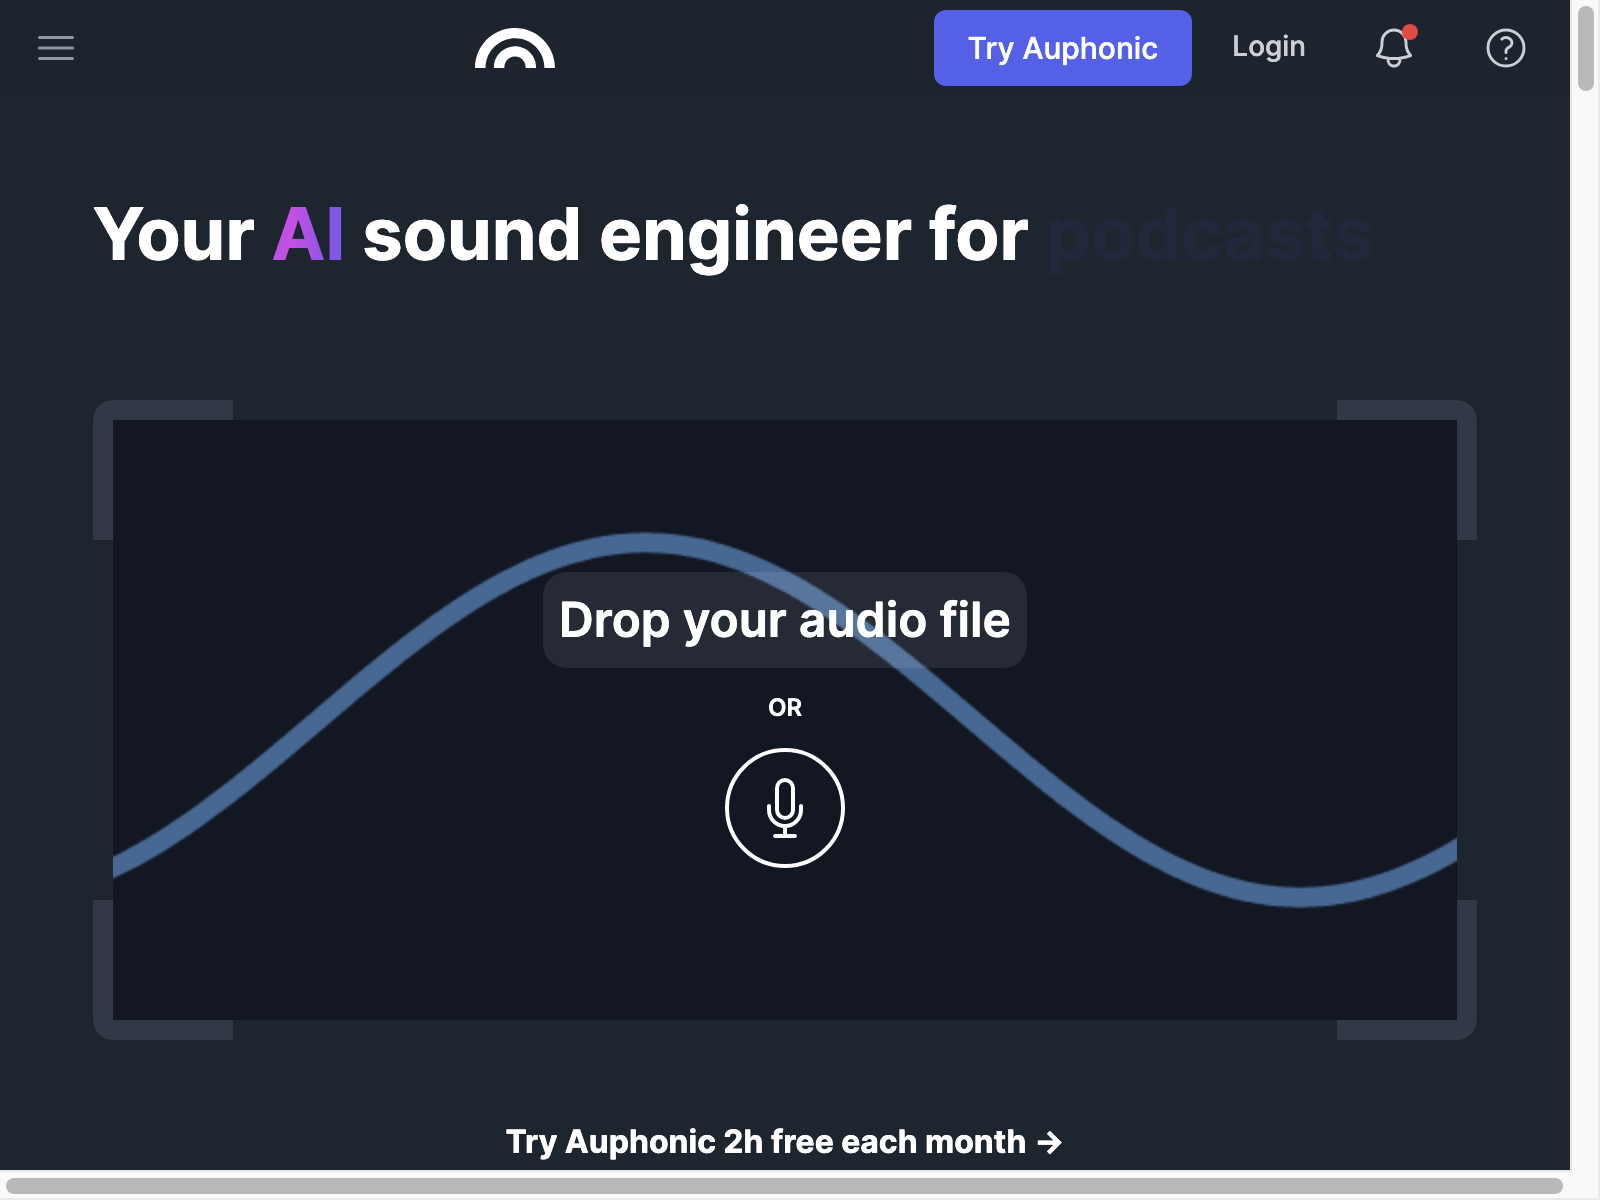 auphonic Review: Pros, Cons, Alternatives